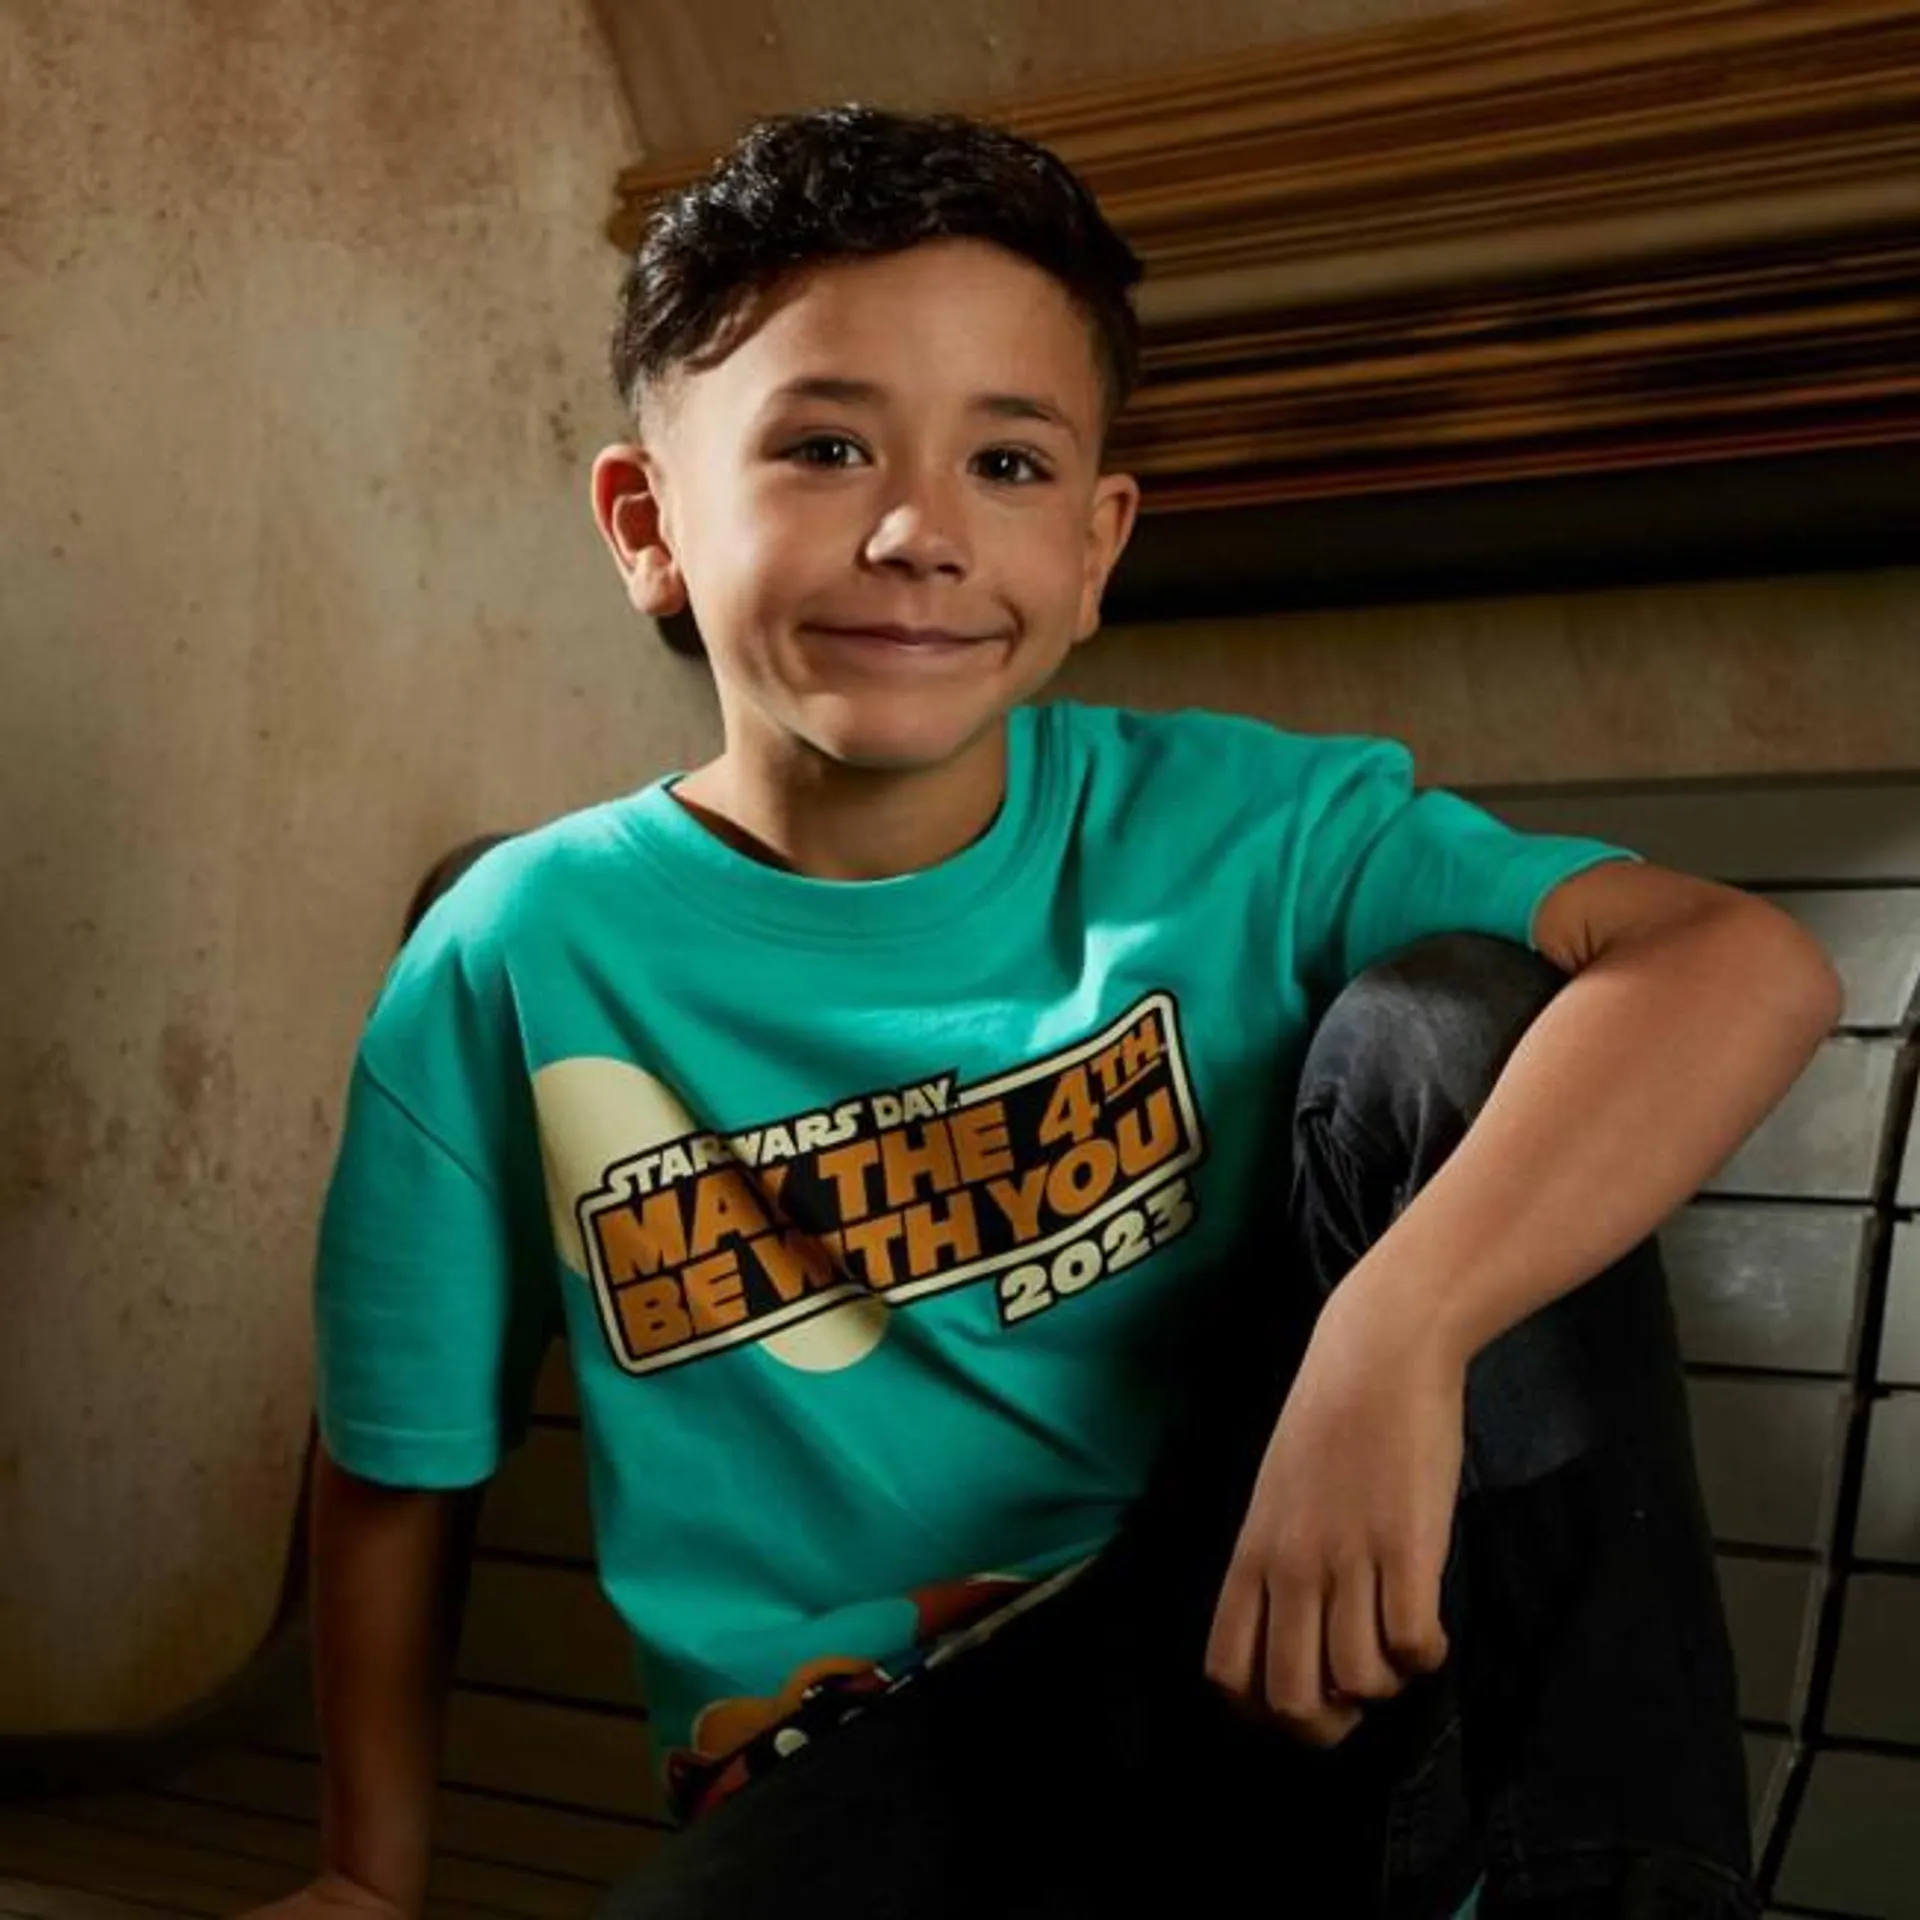 Disney Store Star Wars Day May the 4th 2023 T-Shirt For Kids